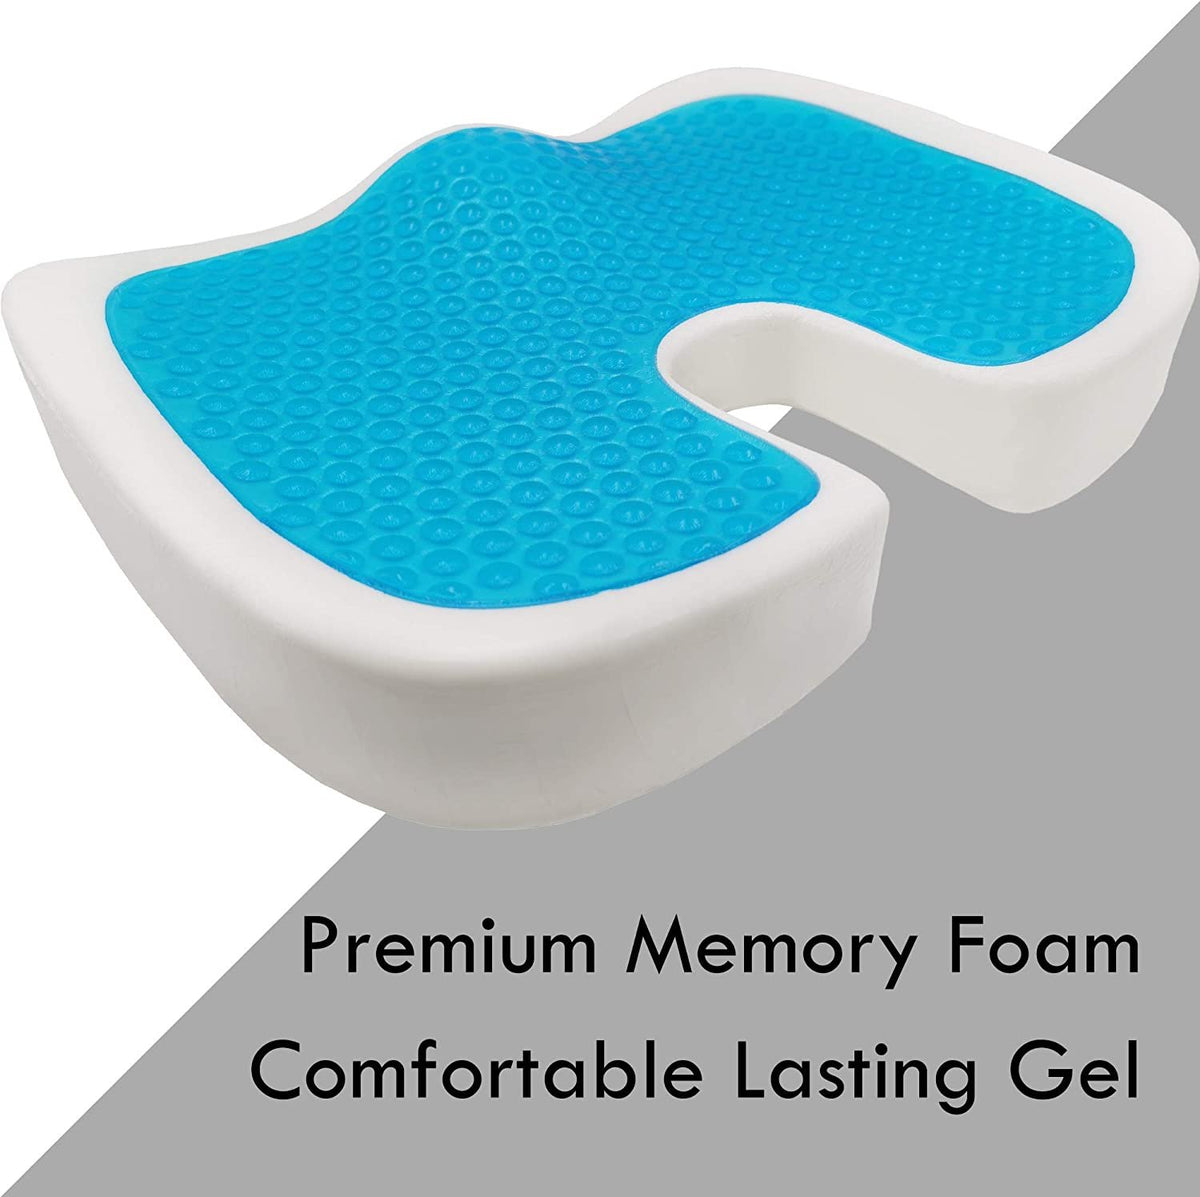 Mars Wellness Orthopedic Gel Memory Foam Coccyx Seat Cushion - Sciatica, Back Pain Relief, and Tailbone Pain - Soft Removable Cover - Mars Med Supply